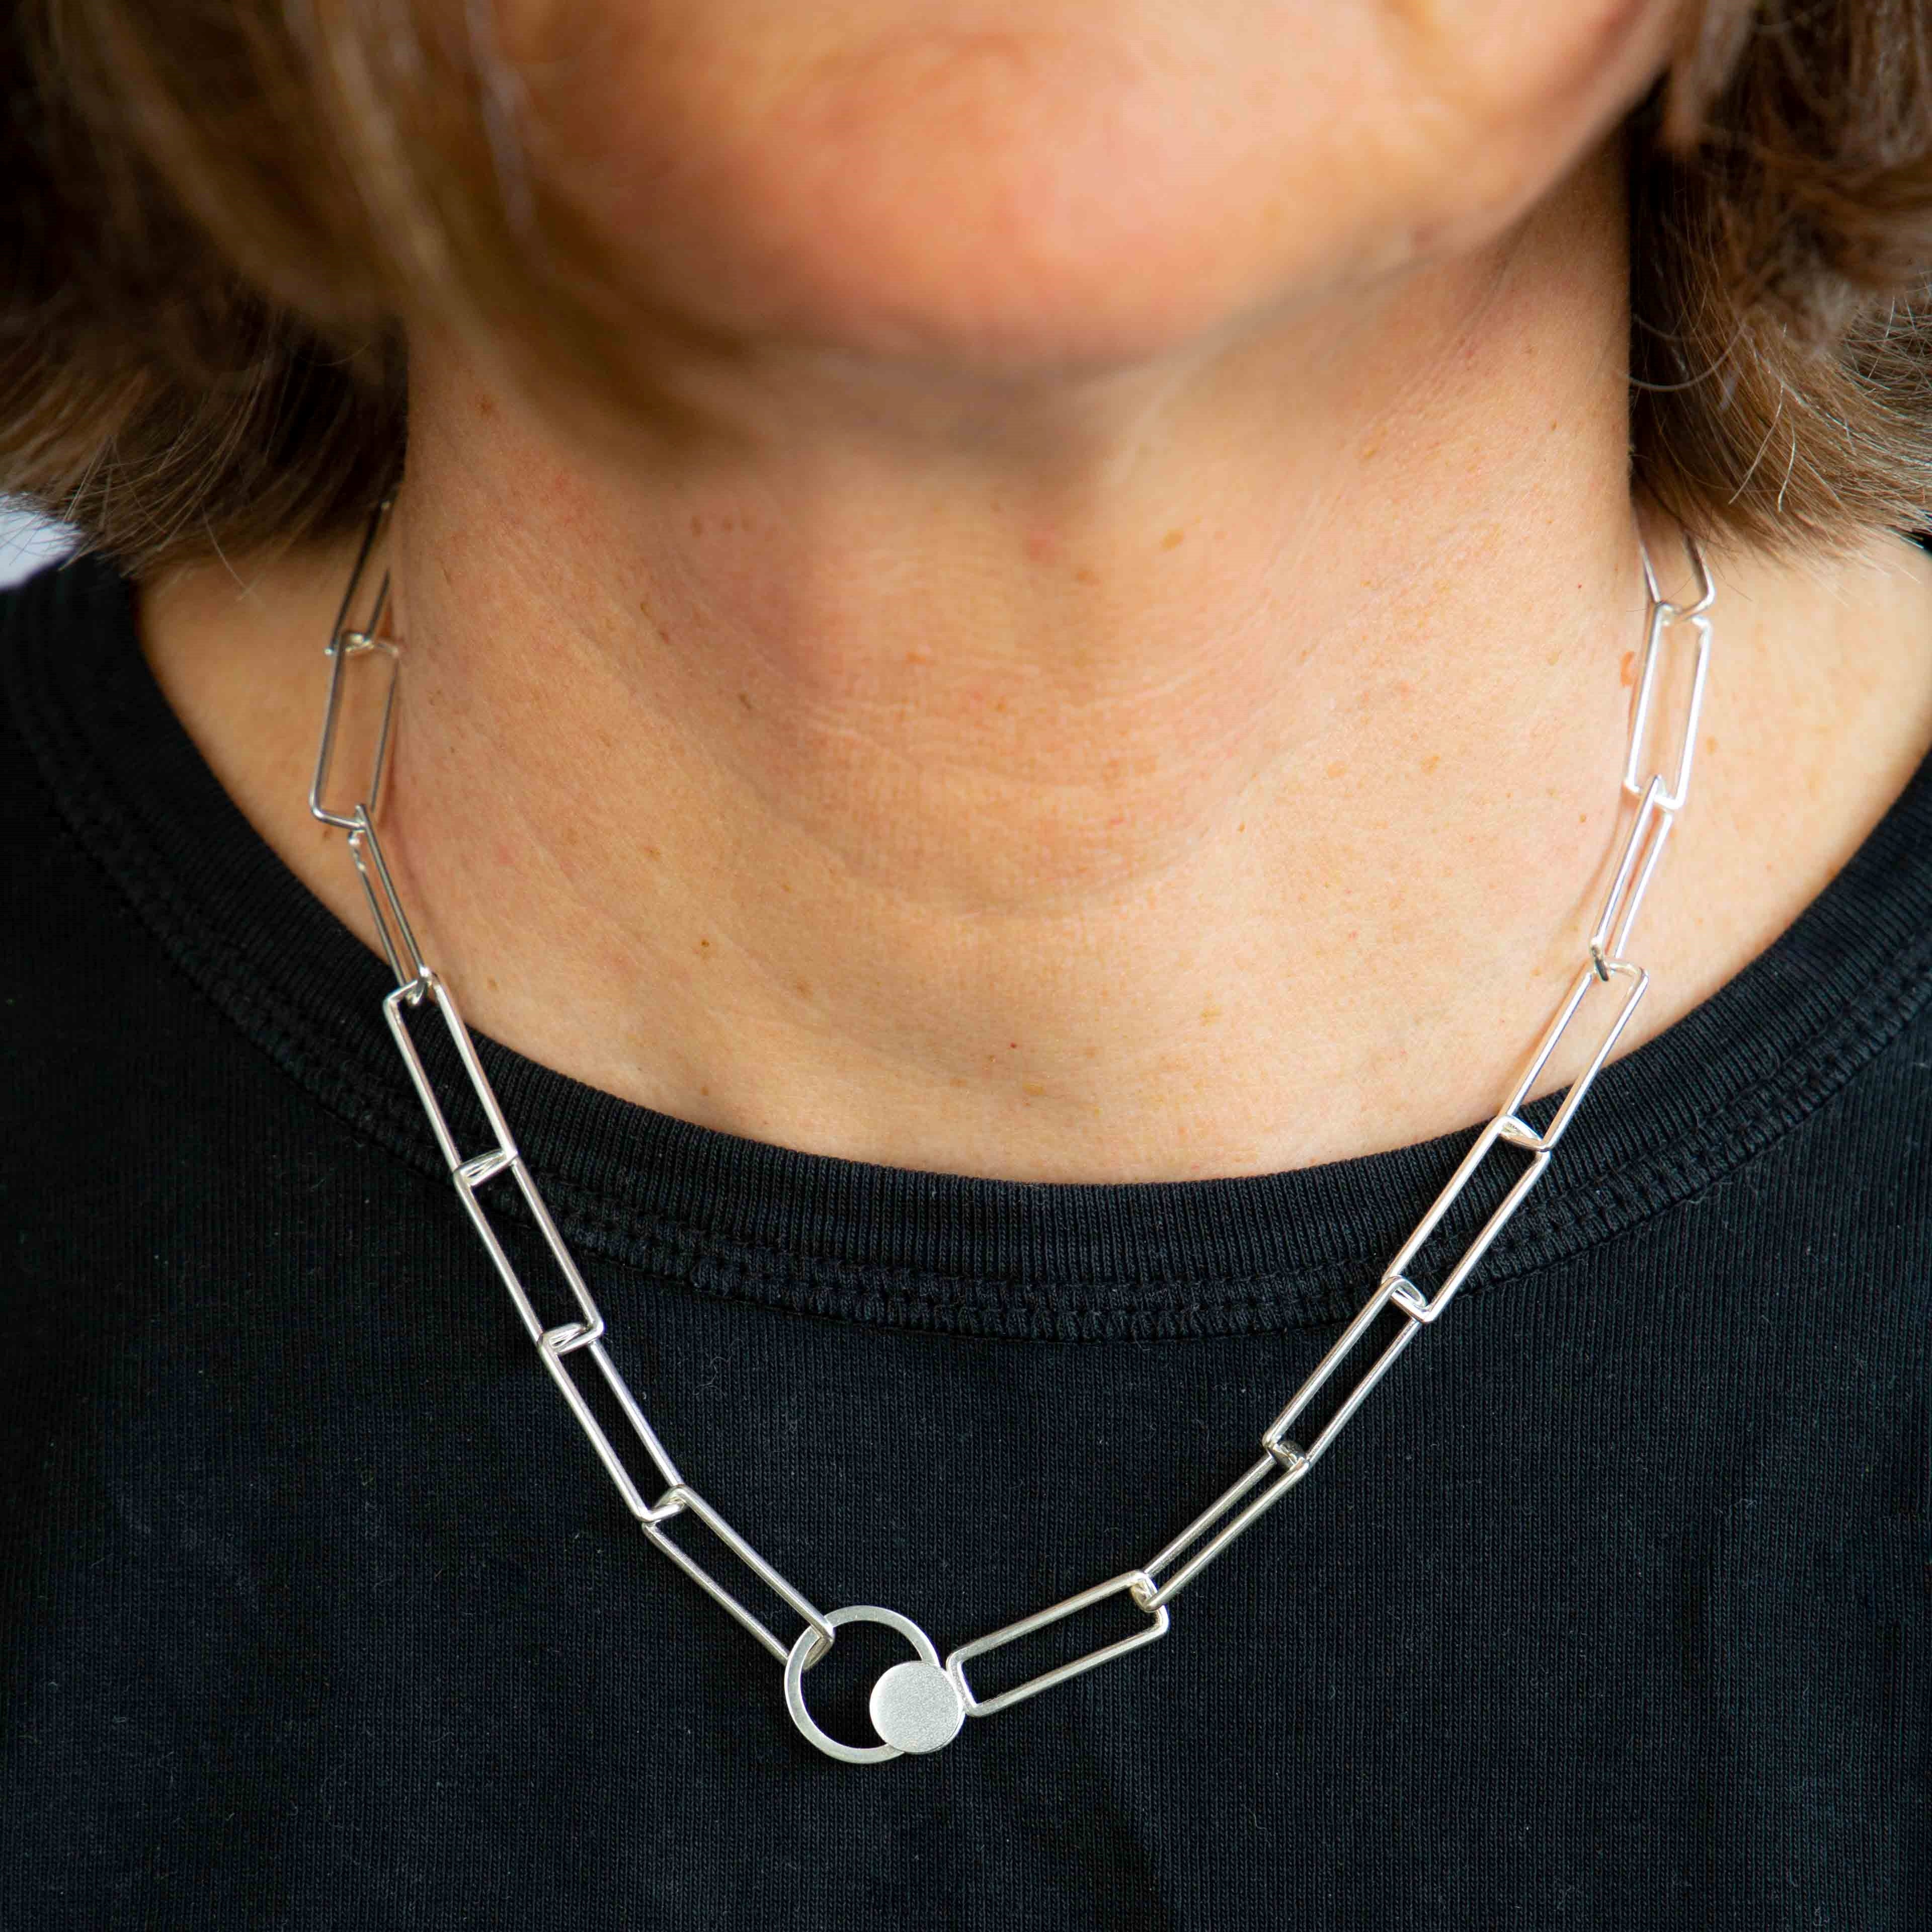 Silver necklace with rectangular links and decorative orbit feature.